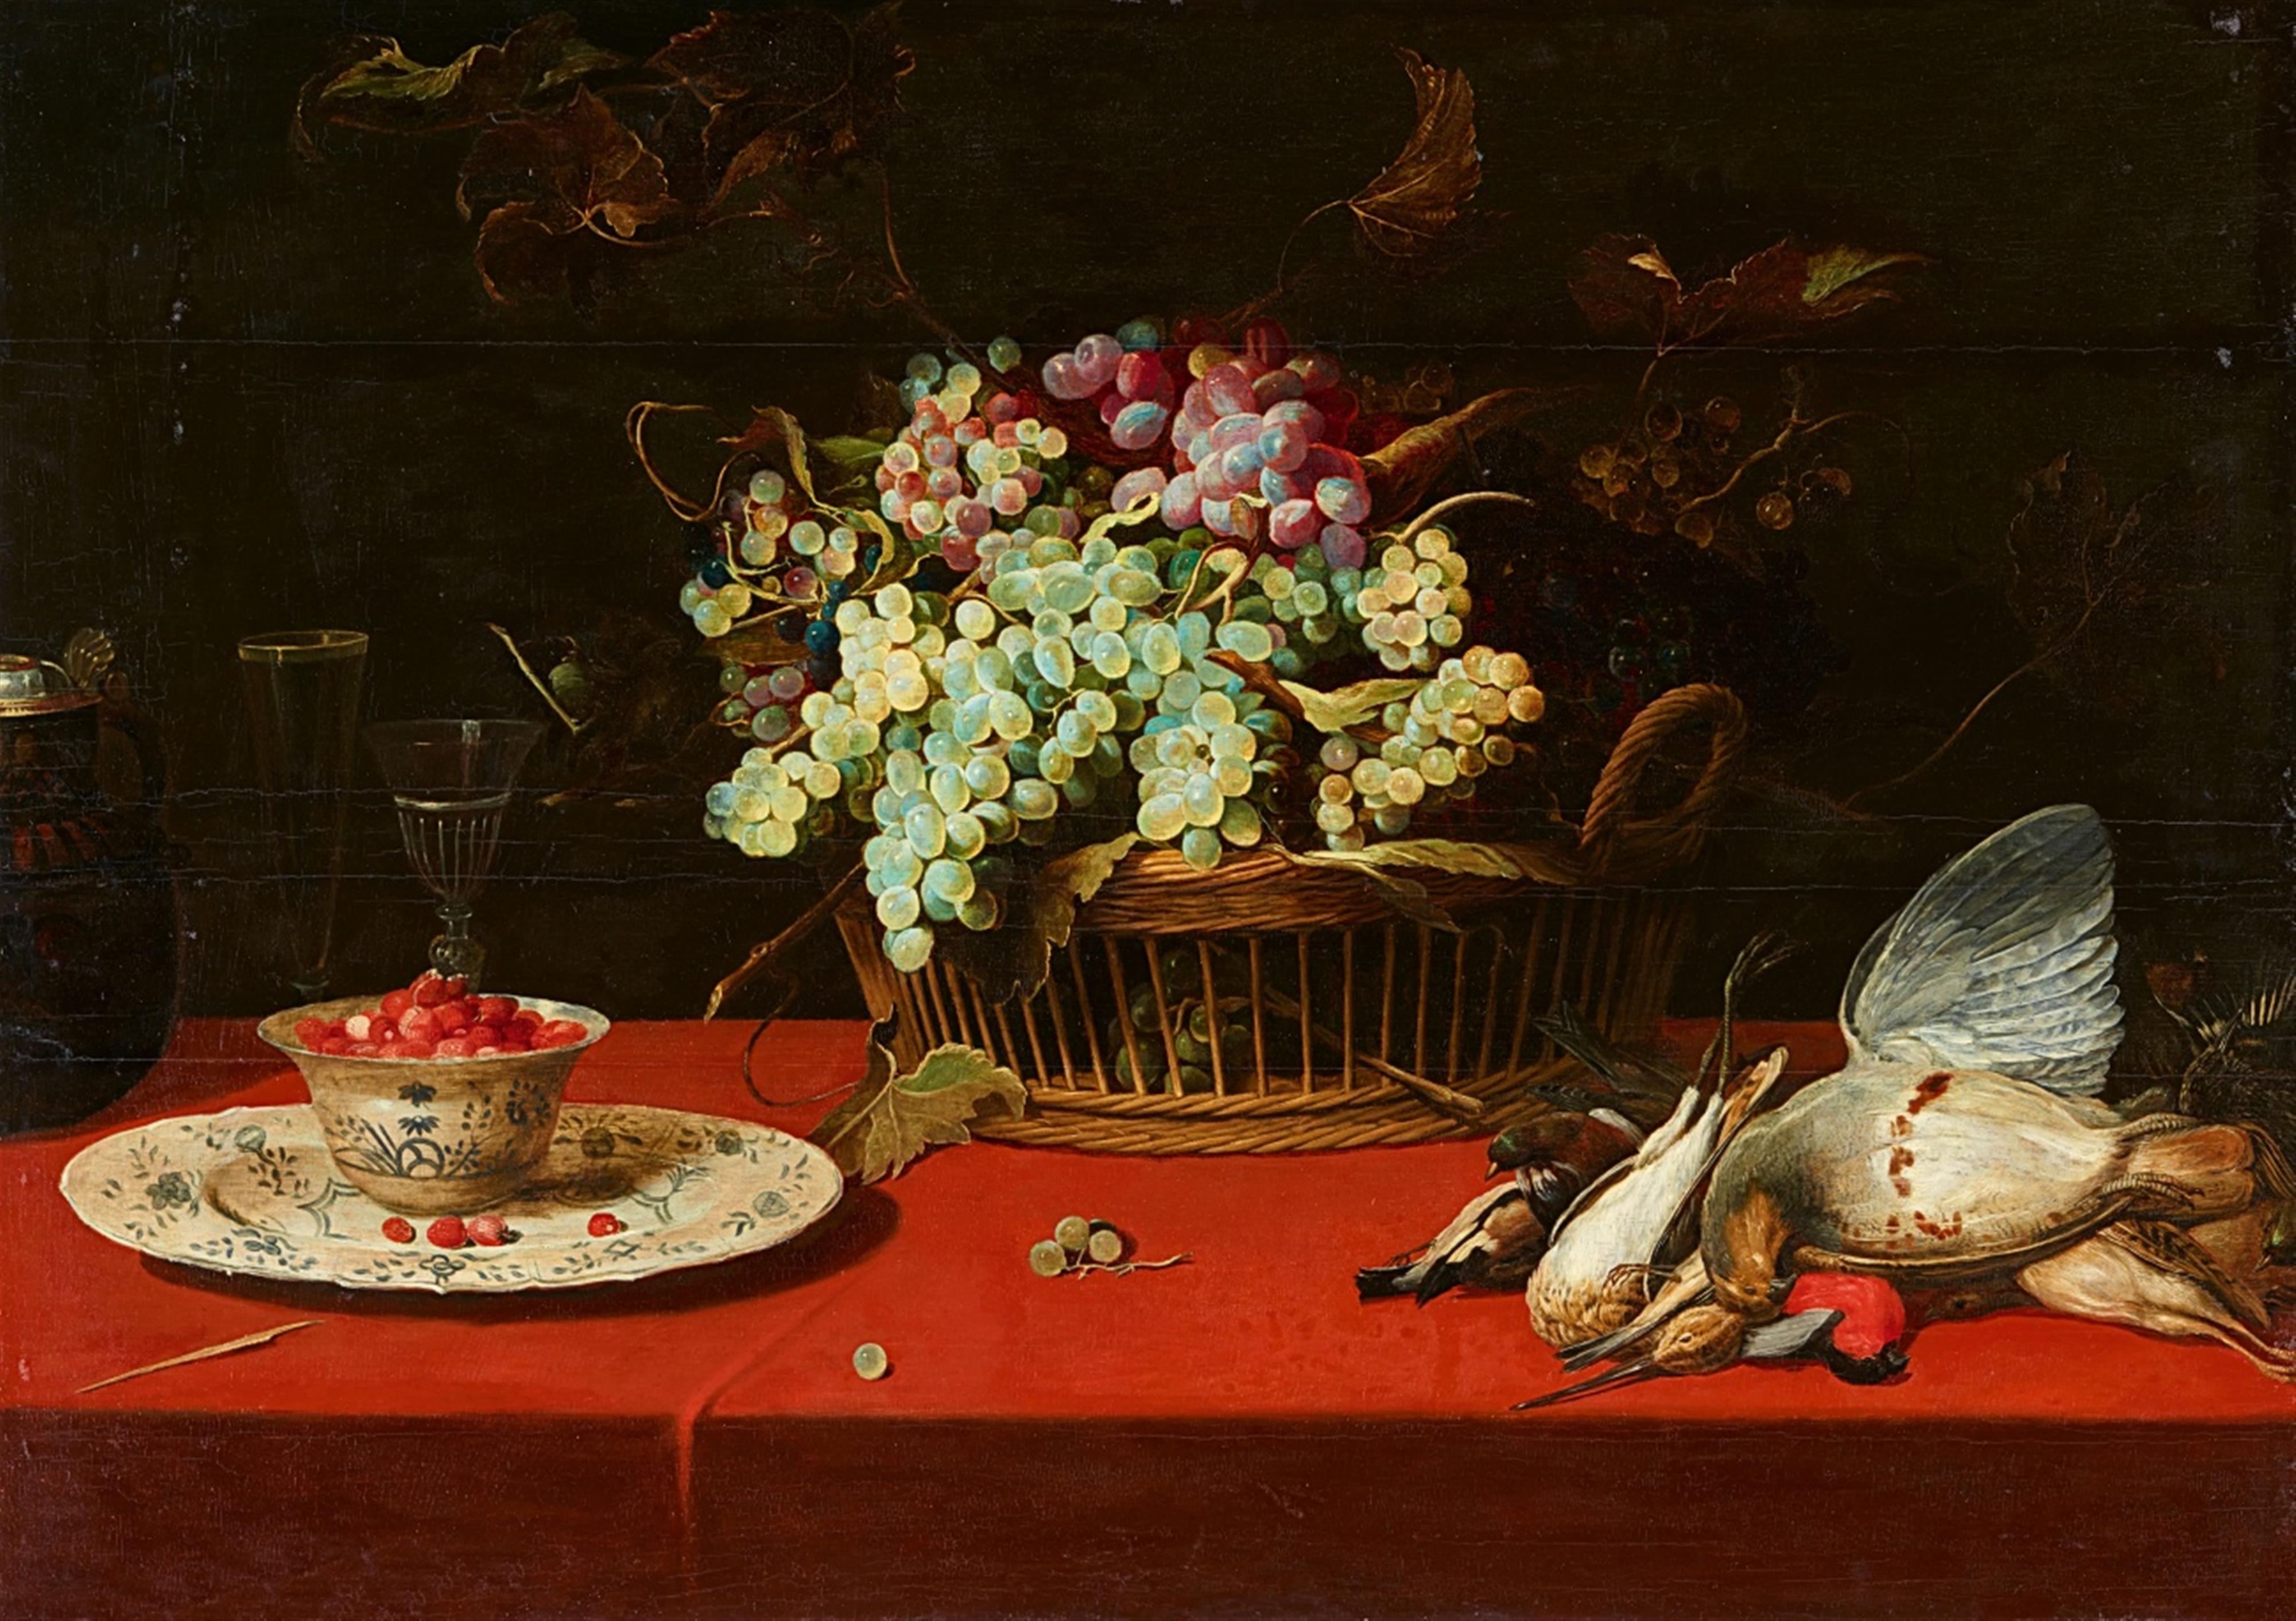 Frans Snyders - Still Life with Grapes in a Basket, a Dish of Strawberries, and Game Birds - image-1